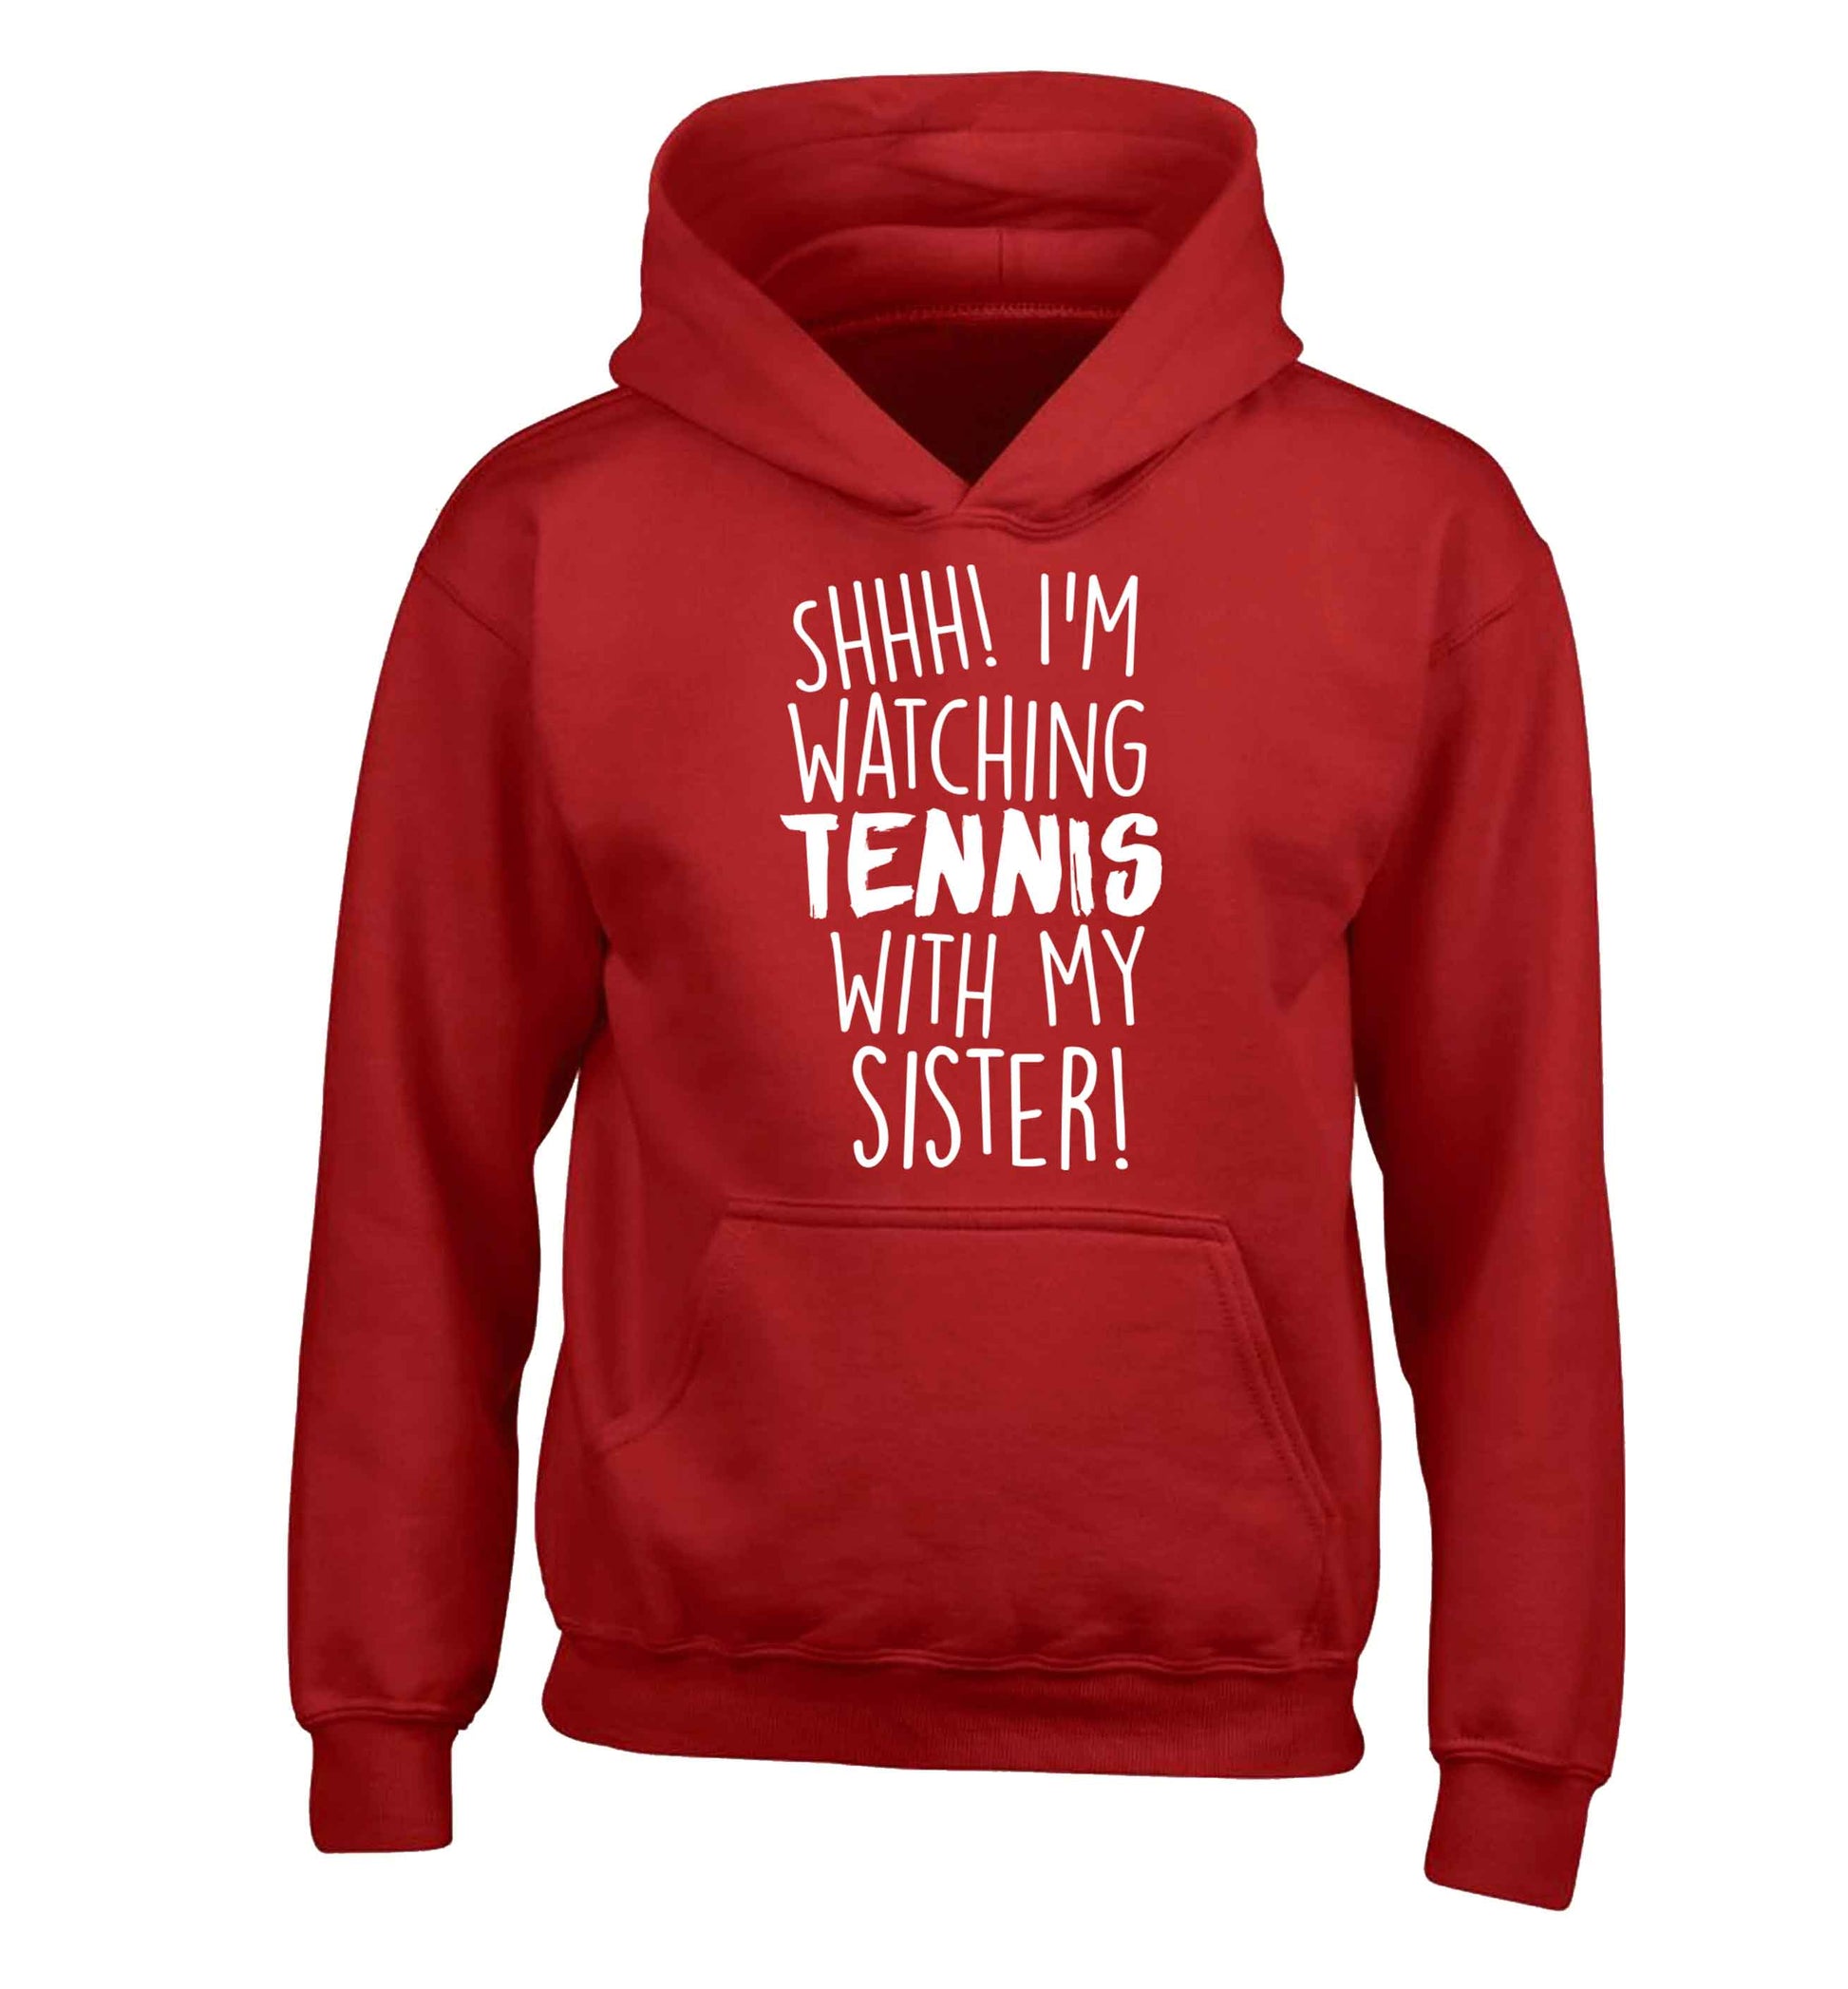 Shh! I'm watching tennis with my sister! children's red hoodie 12-13 Years